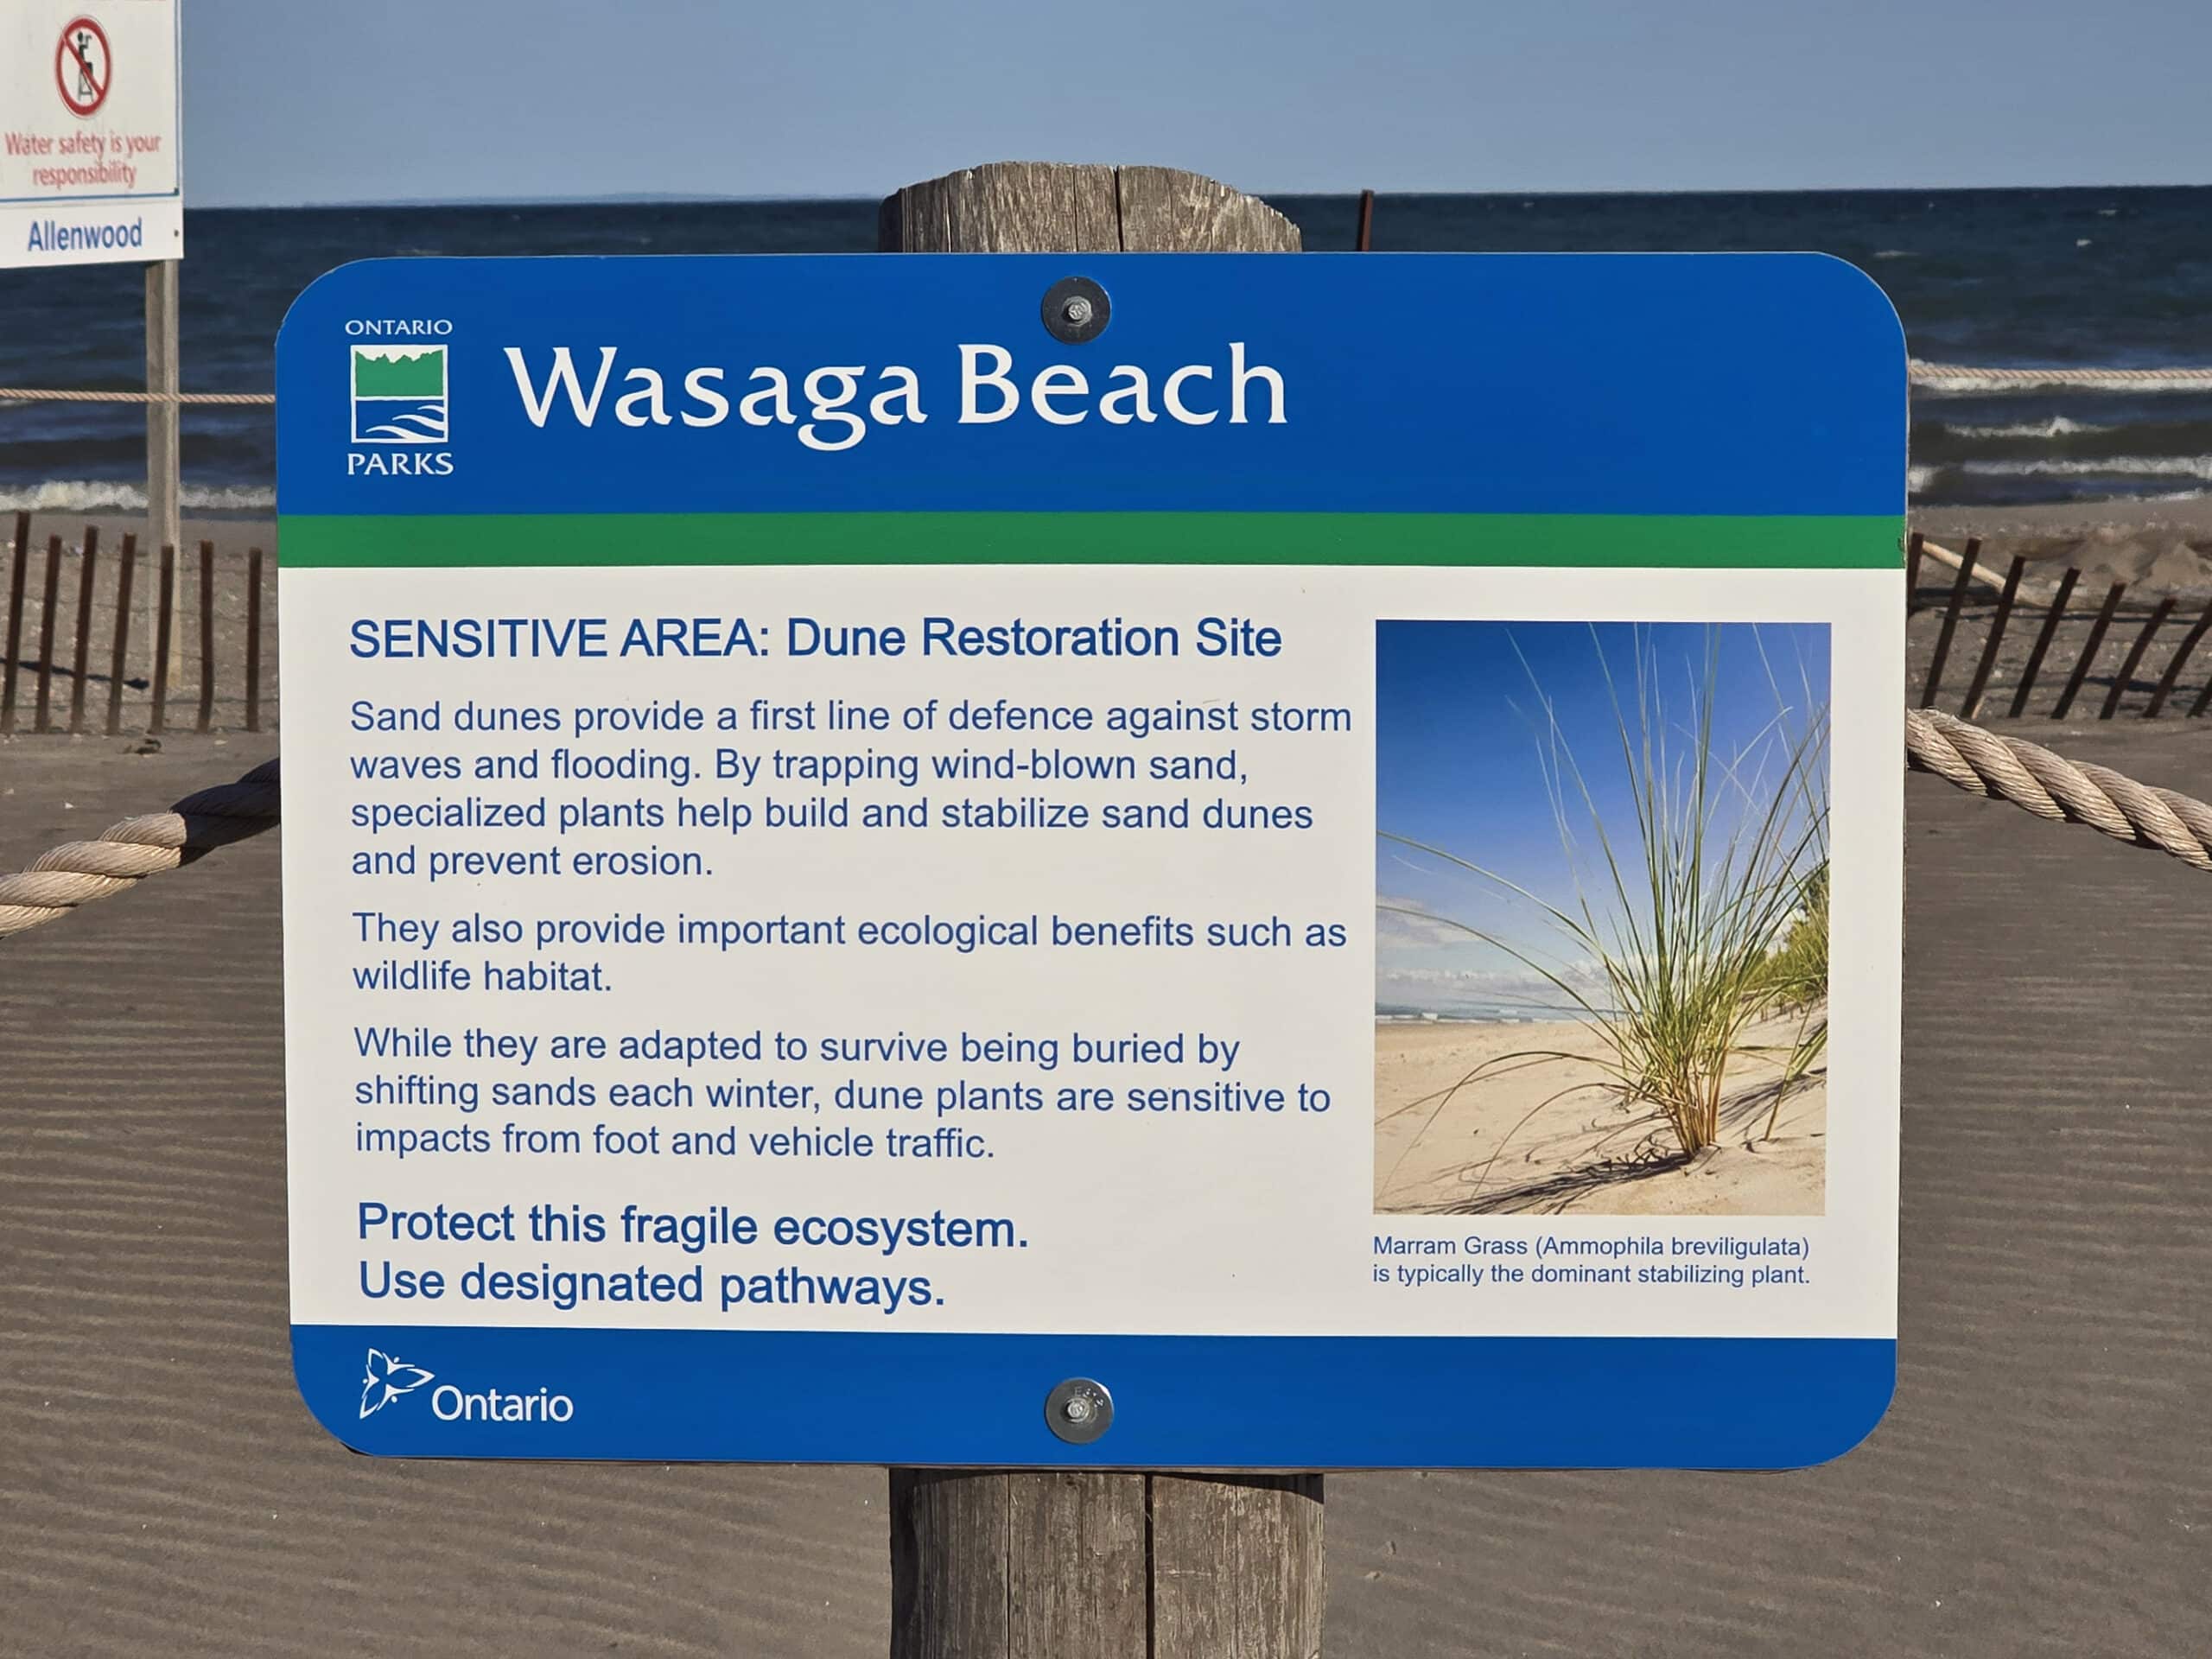 A sign talking about restoring the sand dunes at Wasaga Beach.